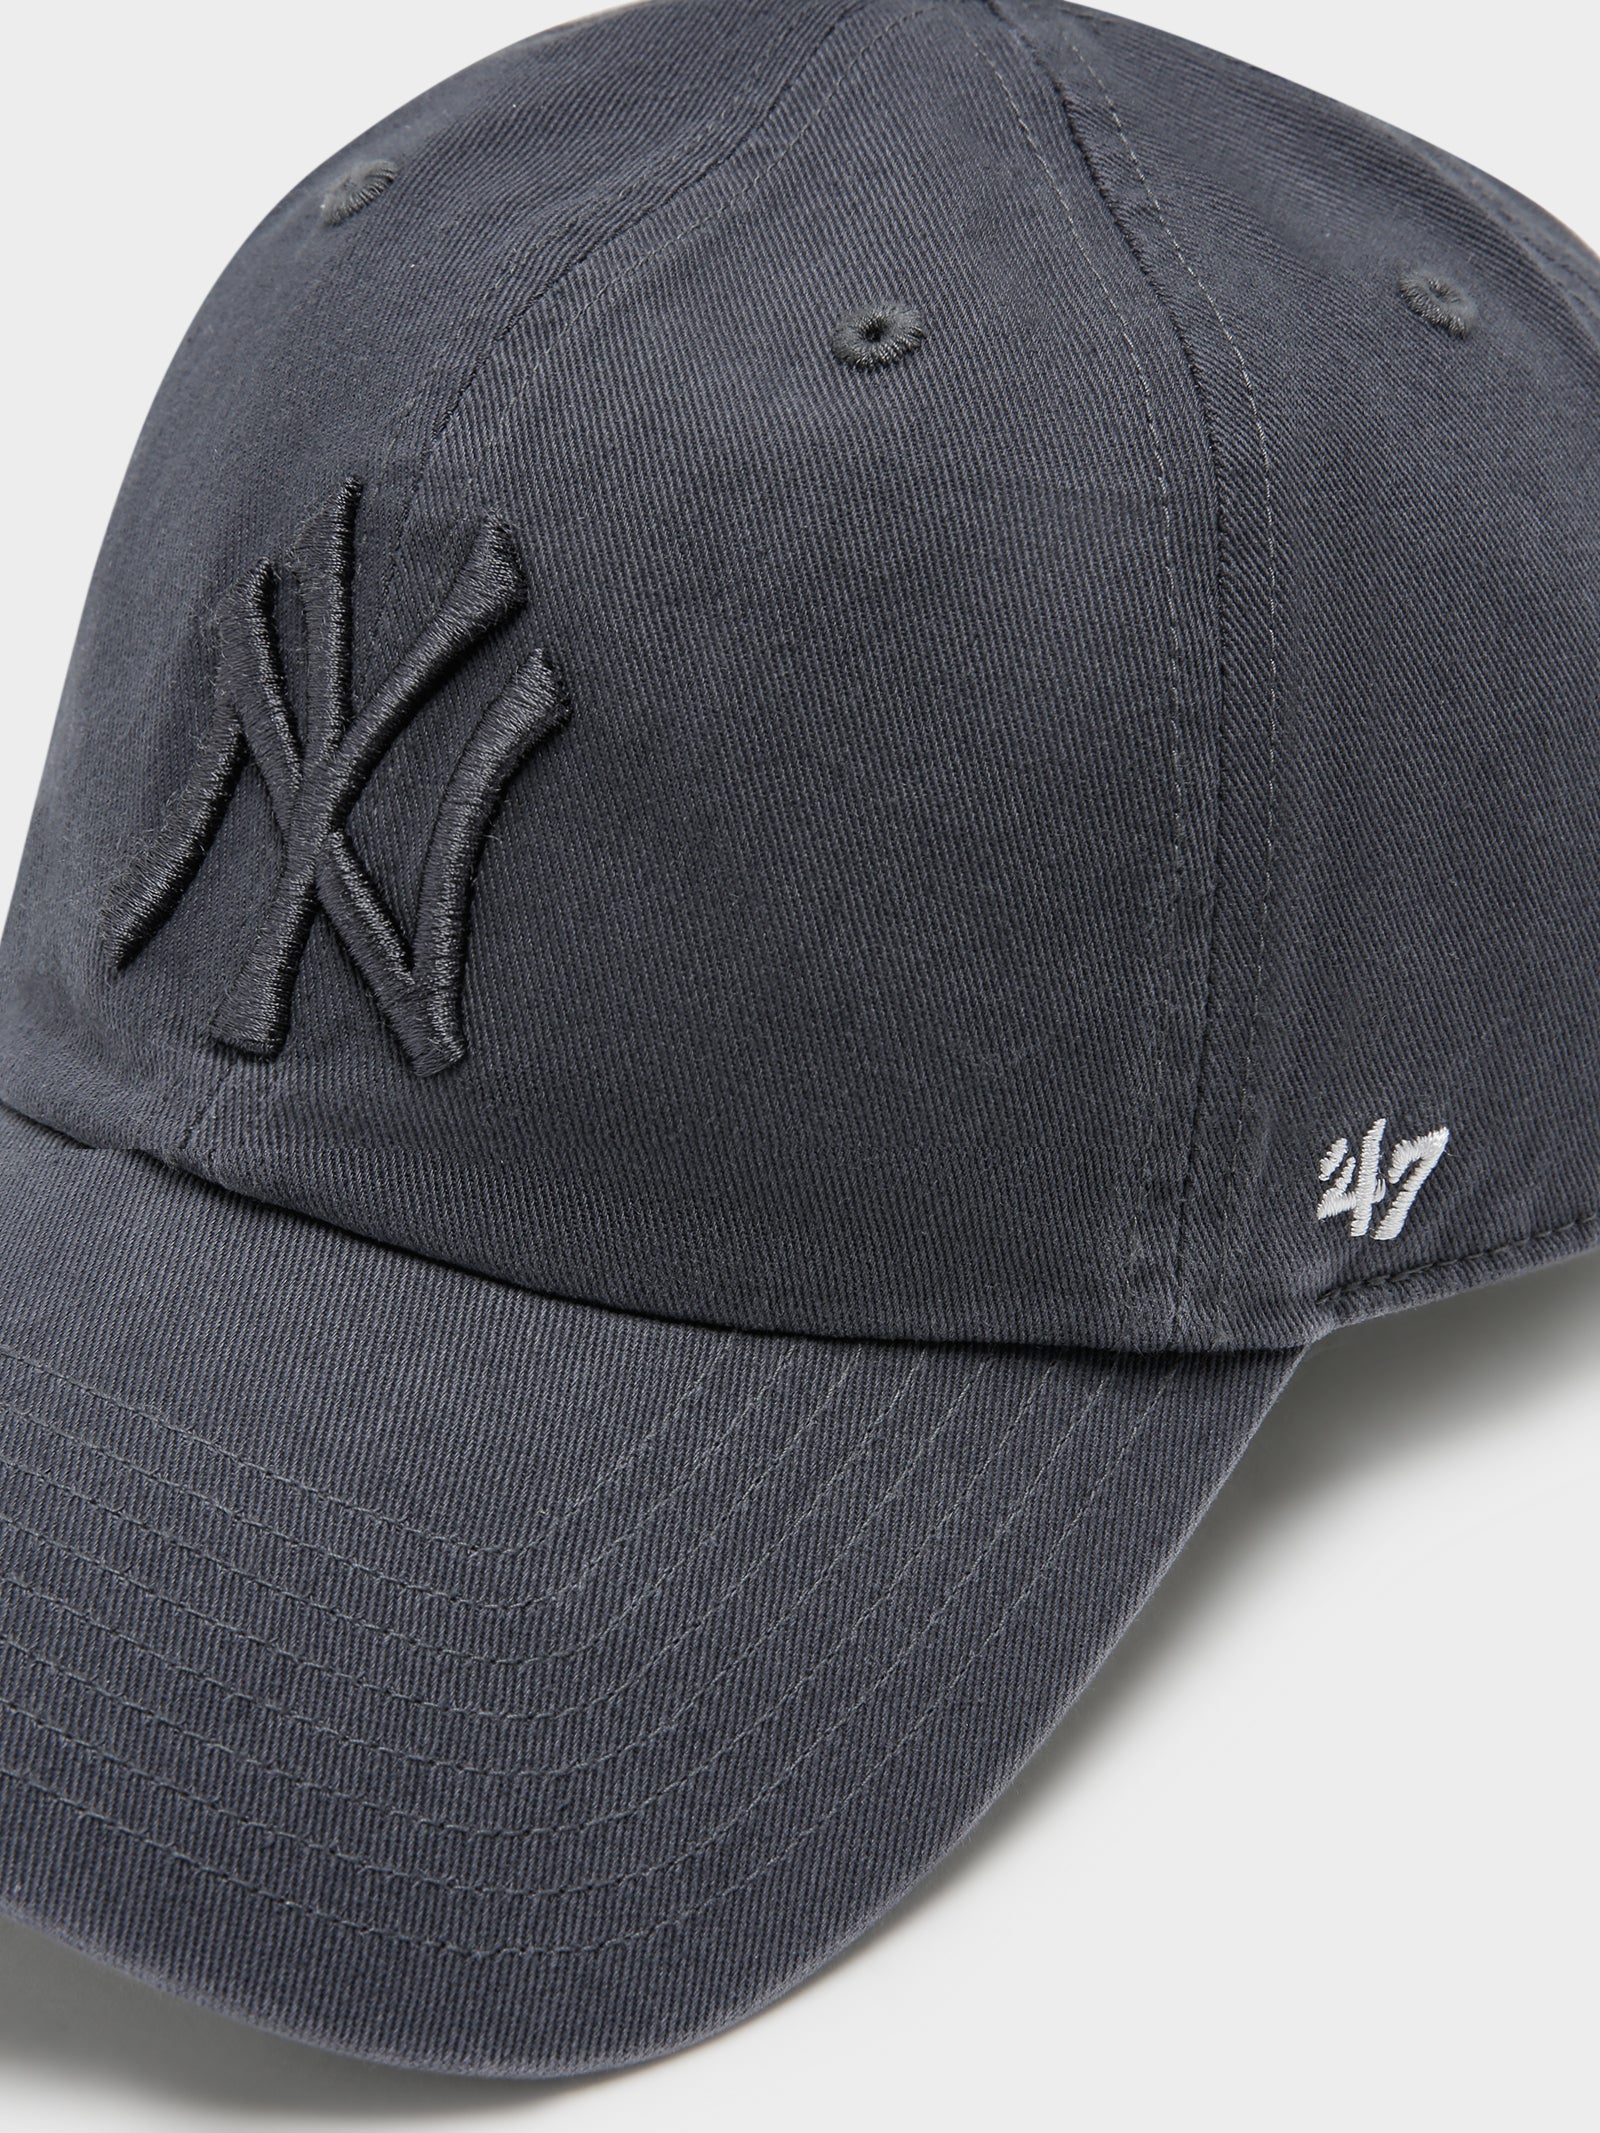 Mens New York Yankees 47 Graphite Franchise Fitted Hat